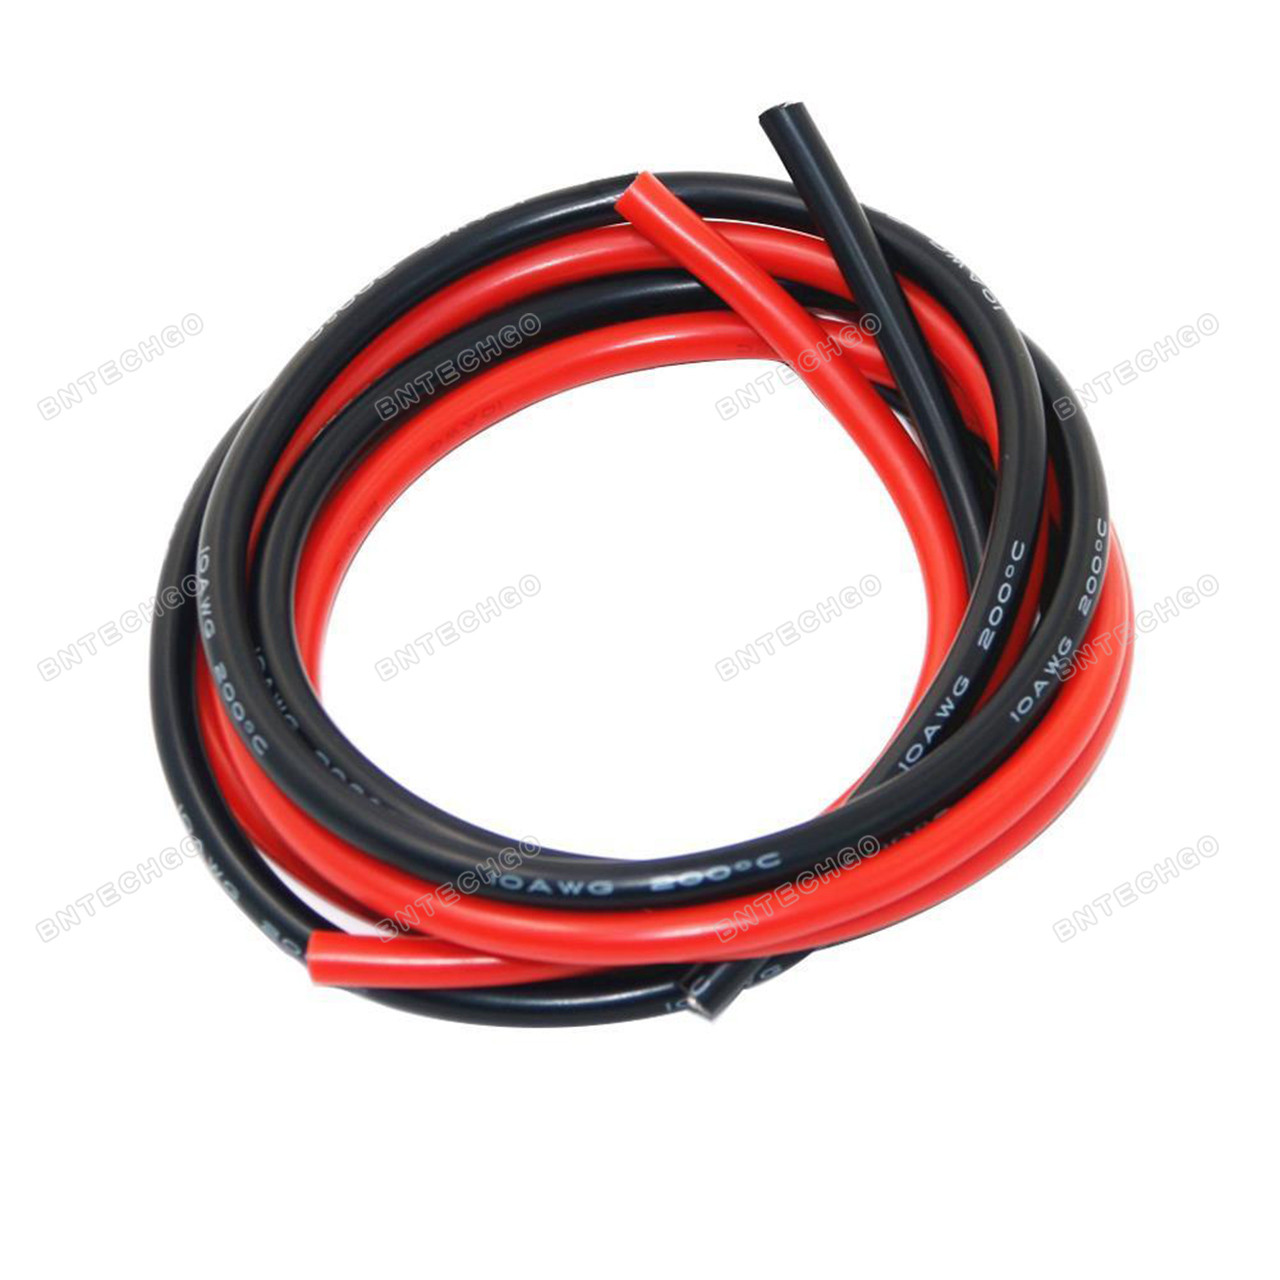 Electrical Wire 18 AWG 18 Gauge Silicone Wire Hook Up Wire Cable 20 Feet  [10 ft Black & 10 ft Red] - Cables & Adapters - Coconut Creek, Florida, Facebook Marketplace